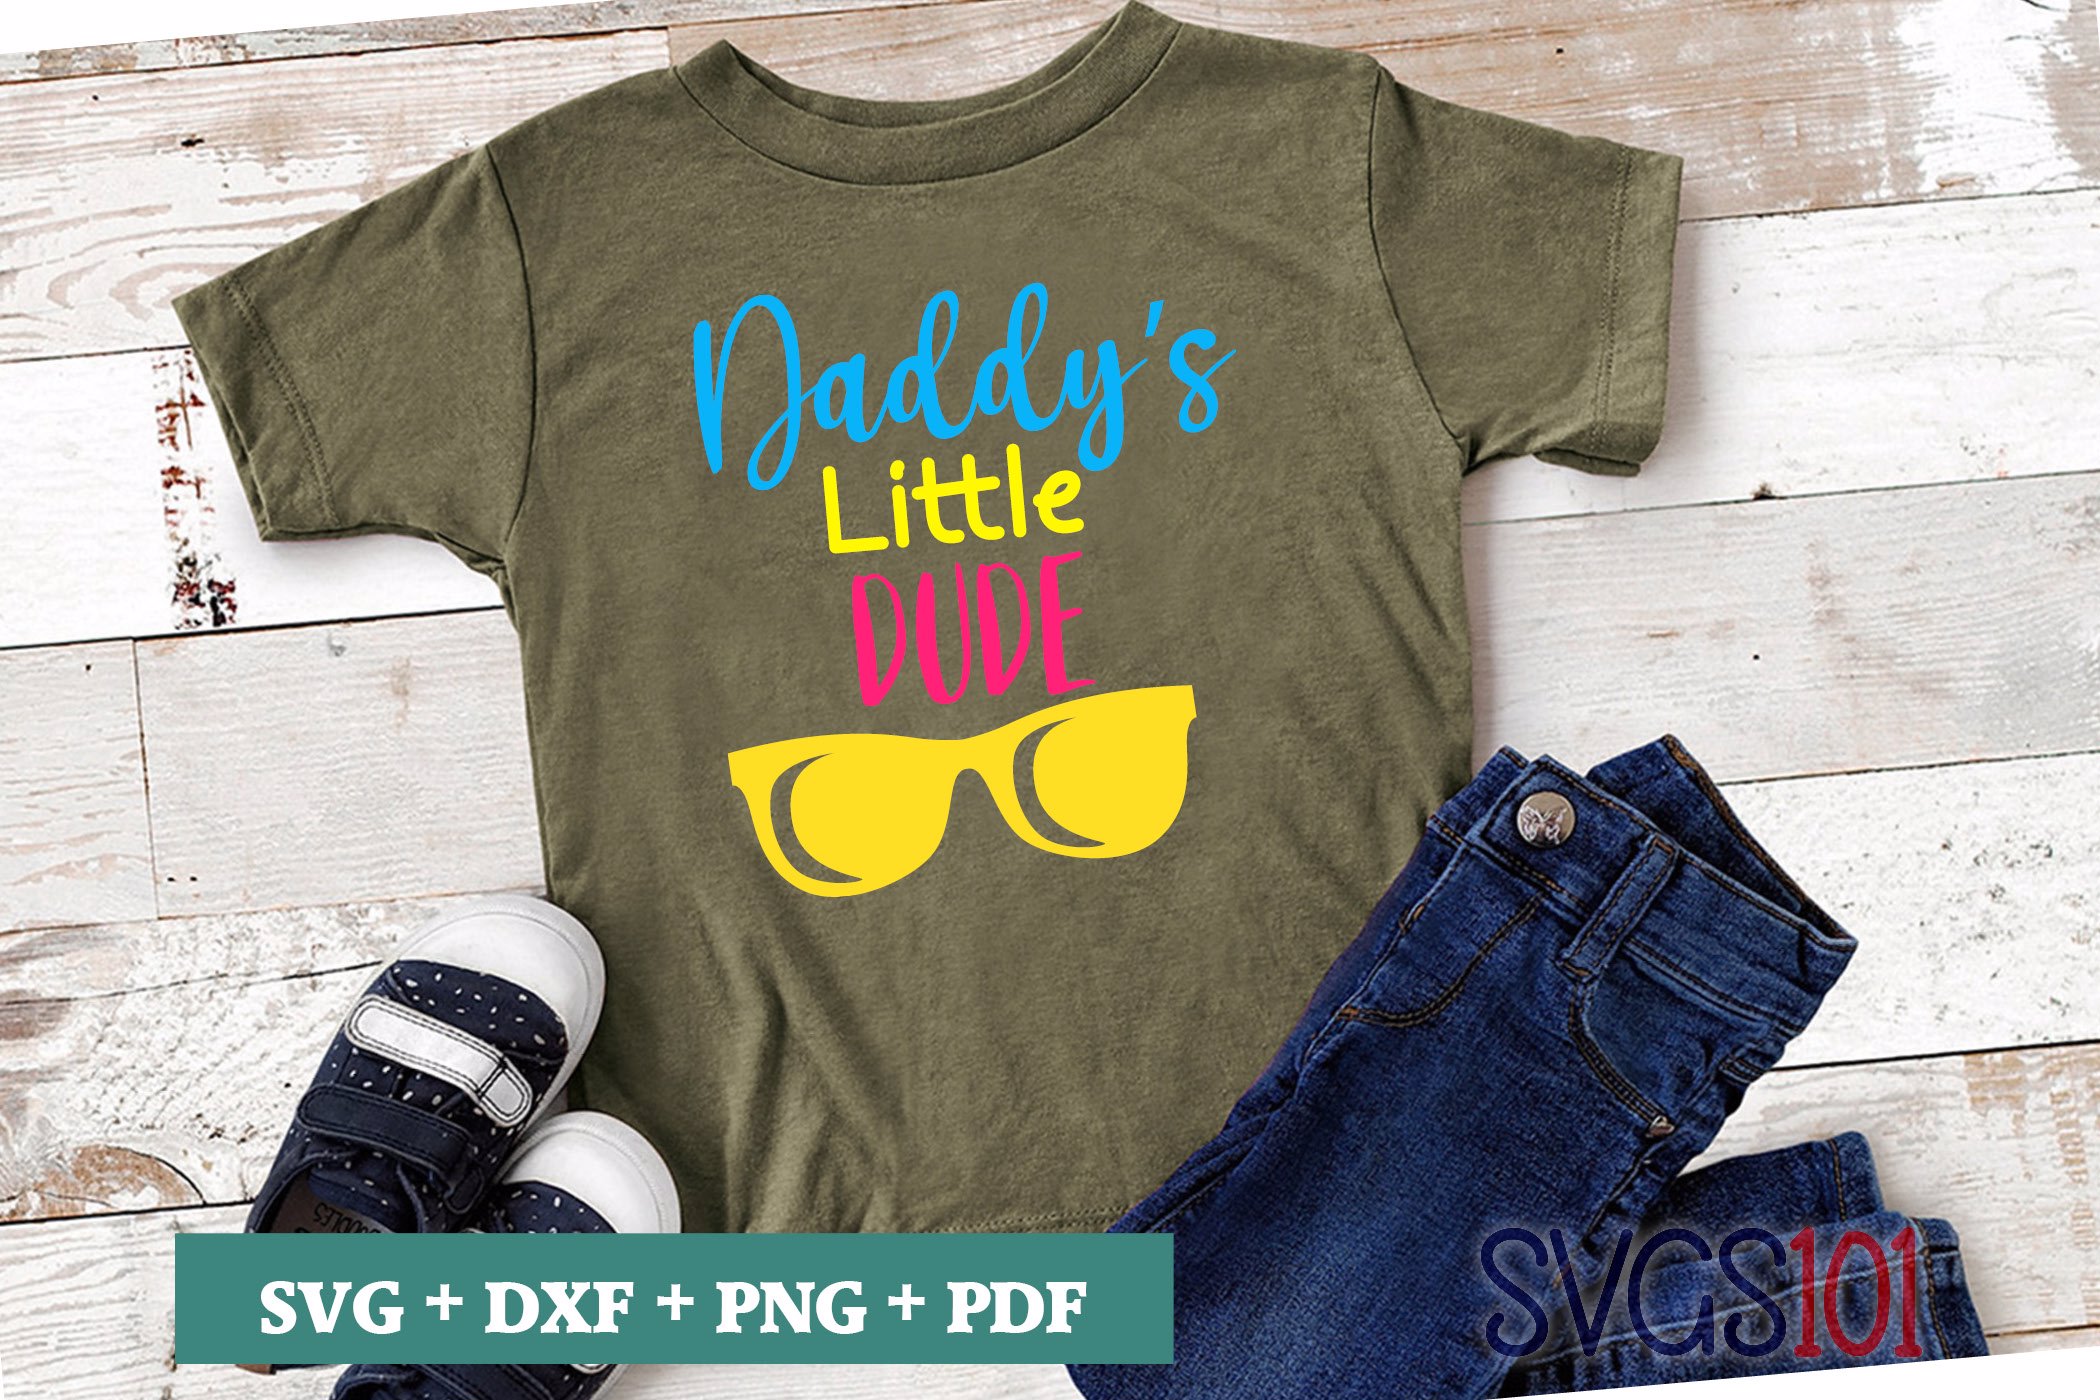 Download Daddy's Little Dude SVG Cuttable file - DXF, EPS, PNG, PDF ...